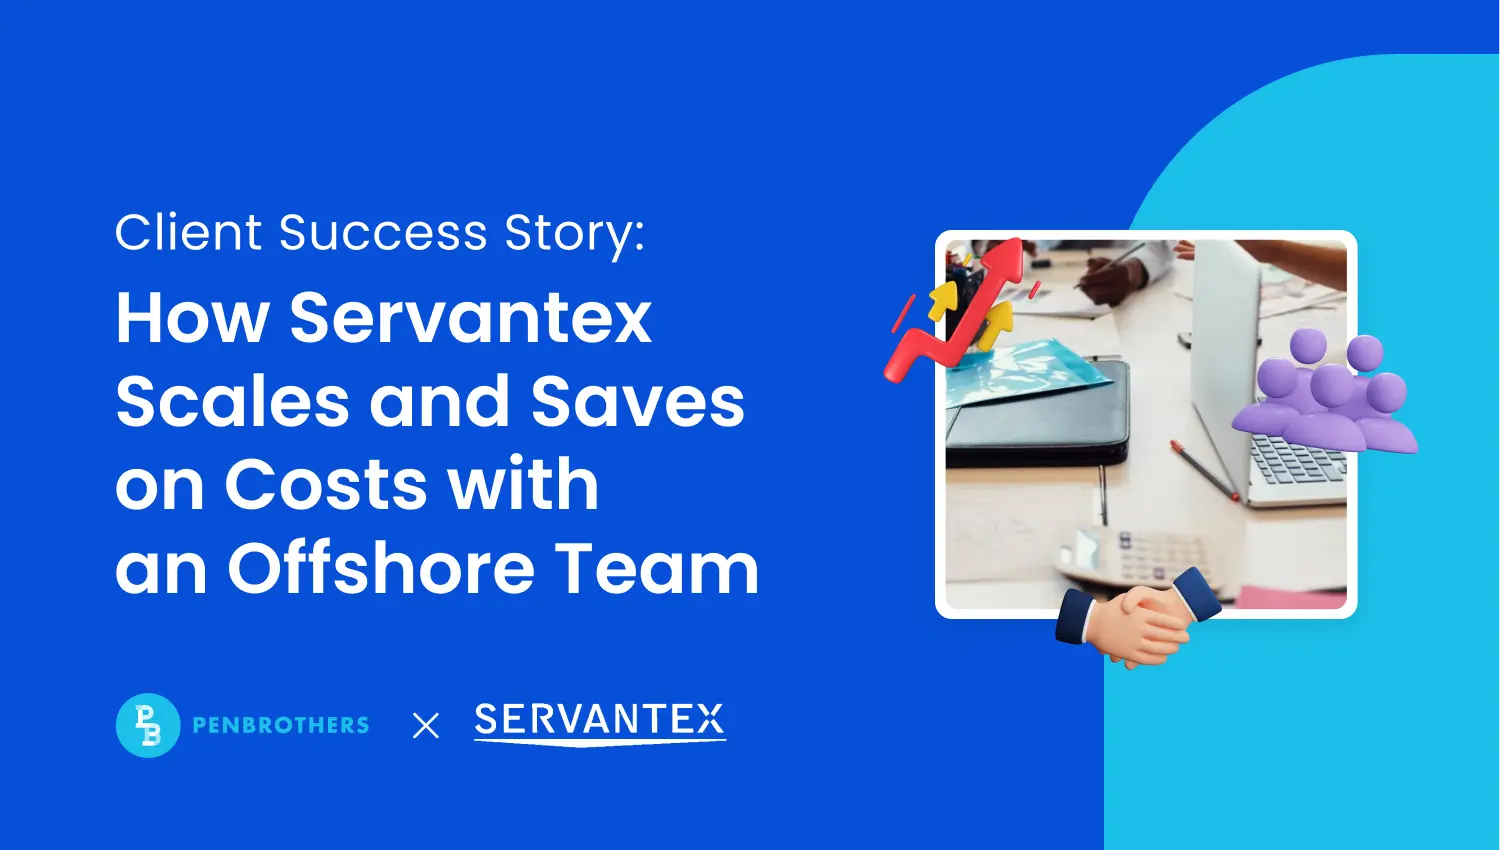 Workforce Management Servantex Scales and Saves on Costs with a Remote Team in the Philippines